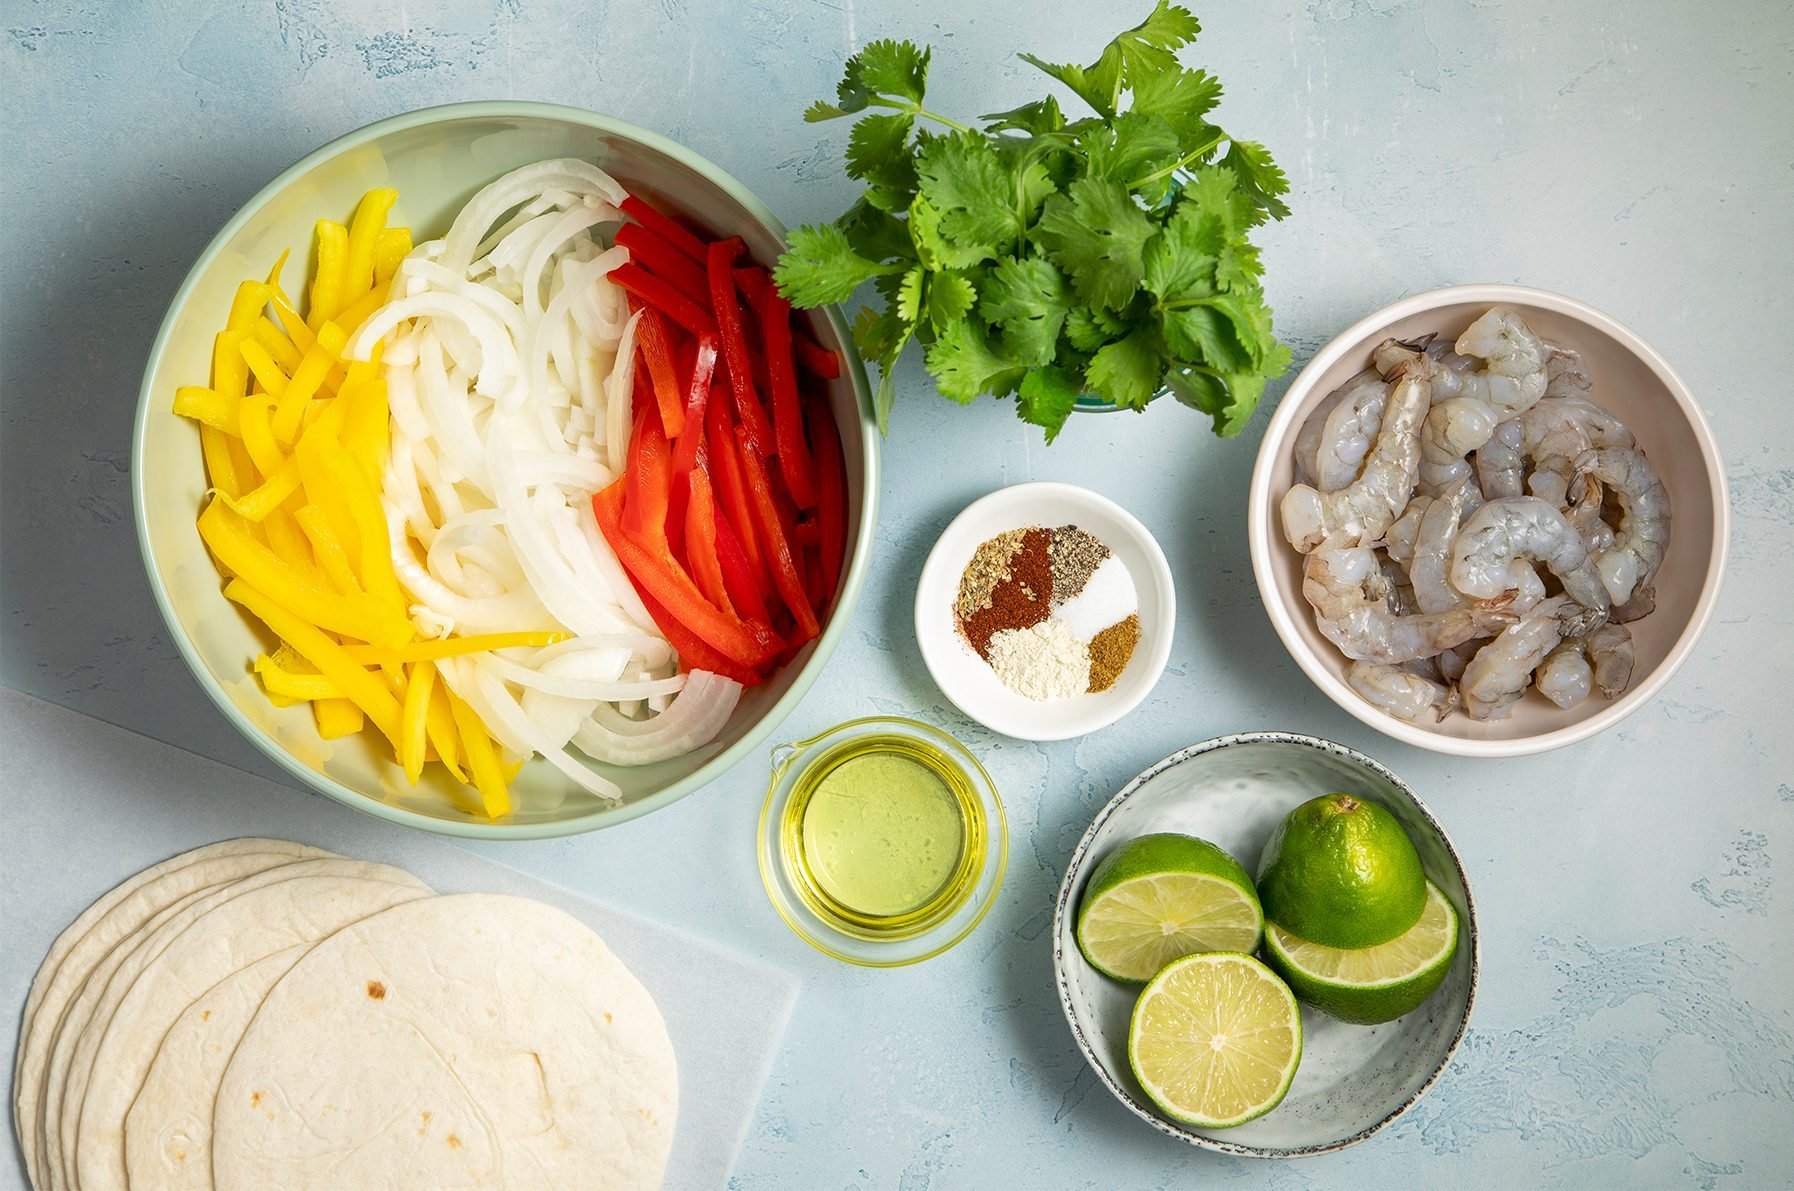 A tabletop with ingredients for shrimp tacos, including a bowl of sliced yellow and red bell peppers and white onions, a small bowl of shrimp, a small plate with various spices, two halved limes, fresh cilantro, a small container of oil, and flour tortillas.